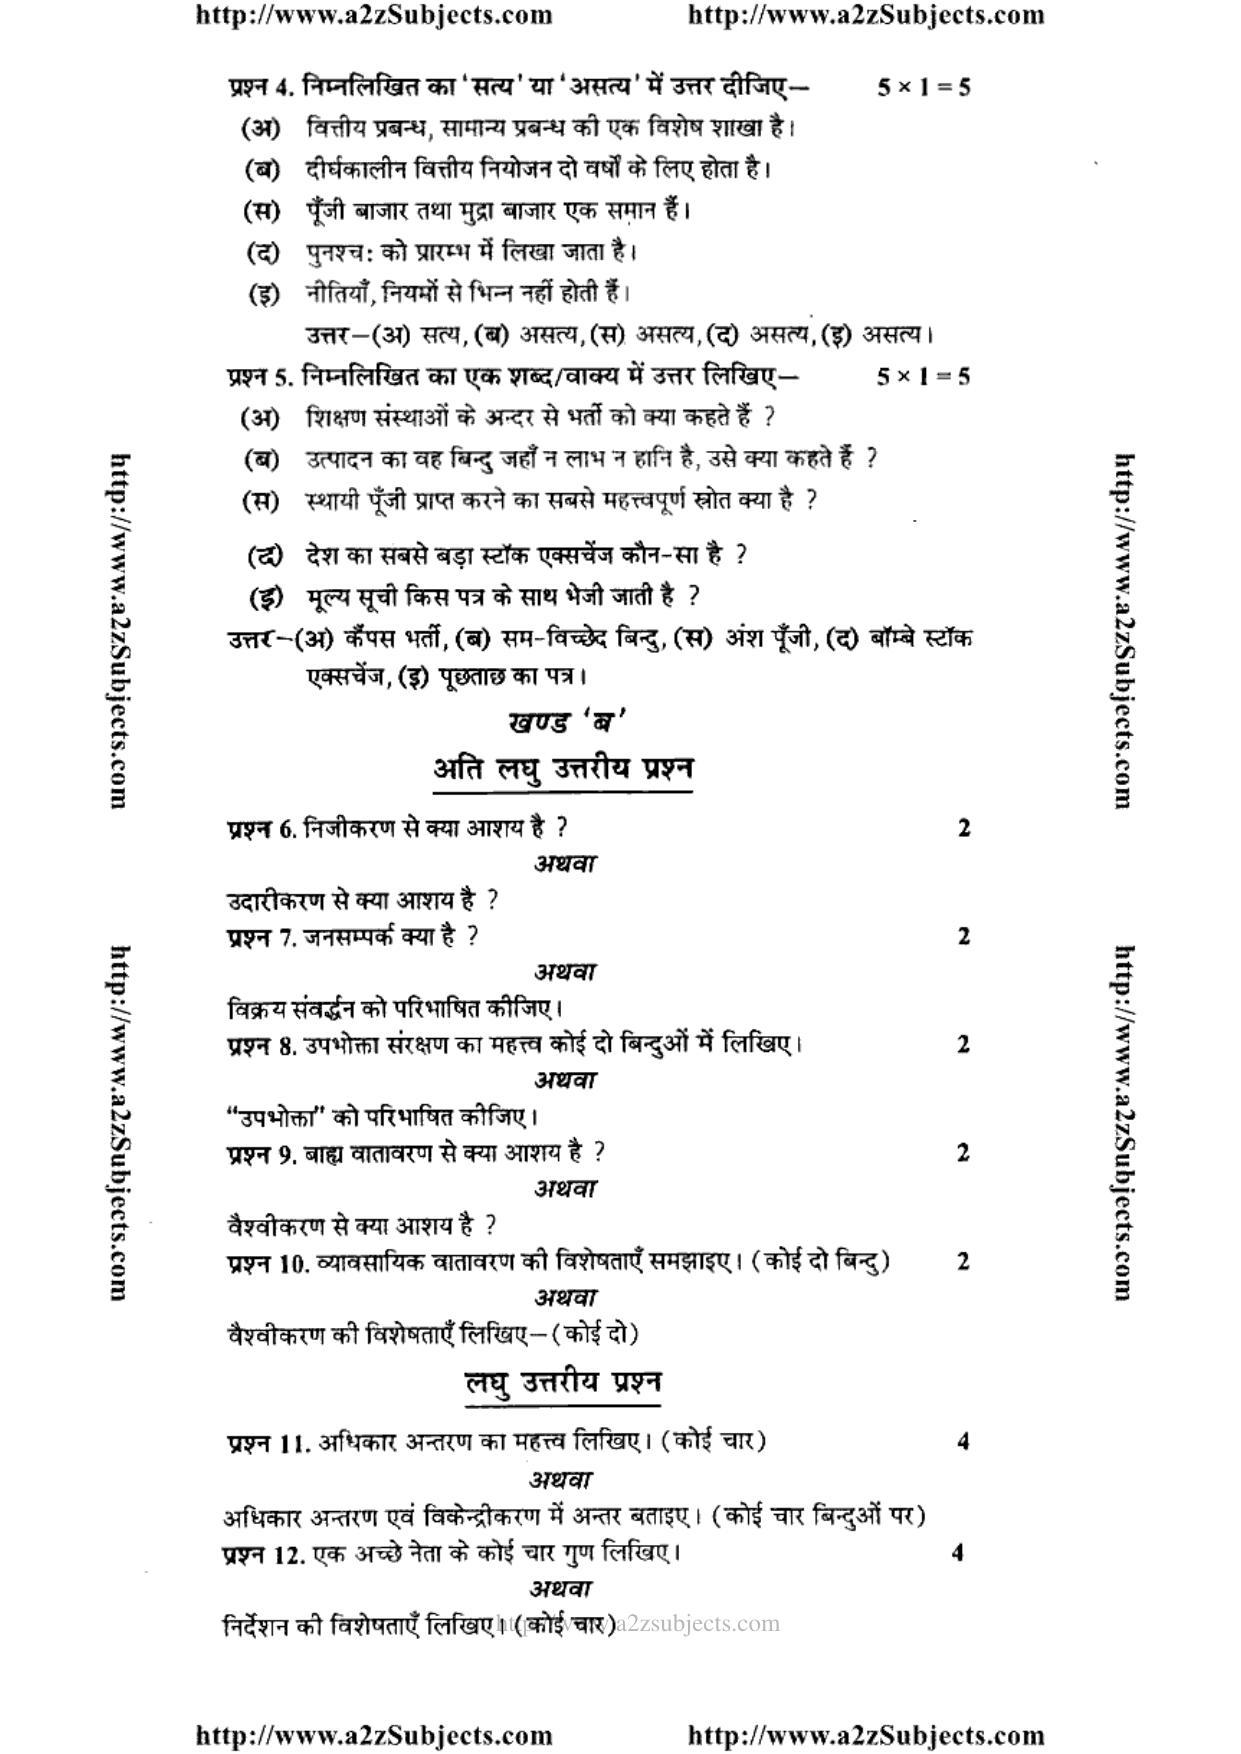 MP Board Class 12 Professional Studies 2016 Question Paper - Page 2